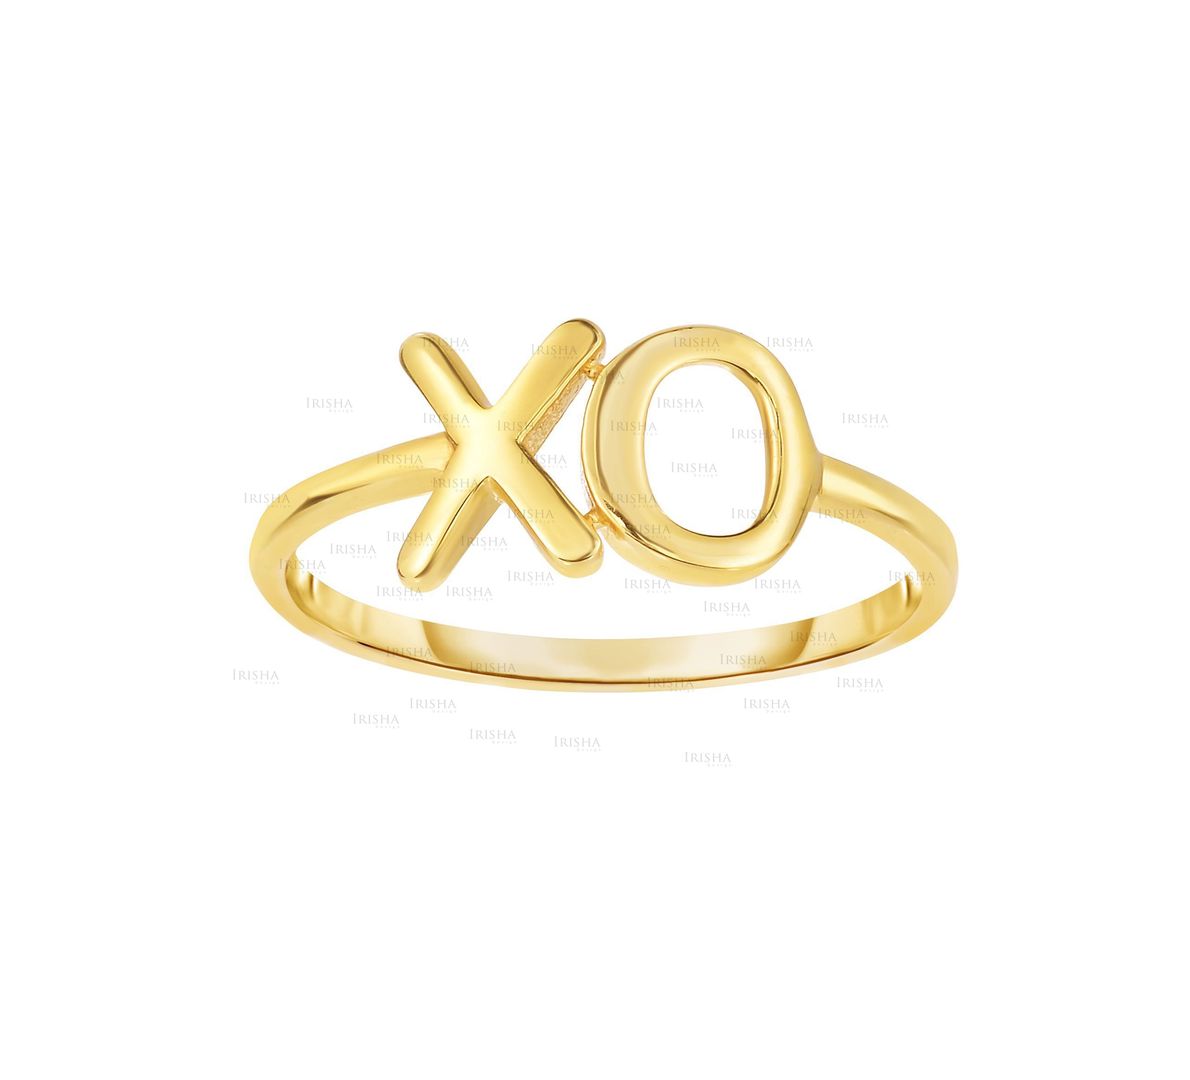 14K Yellow Gold Shiny XO Ring Fine Jewelry Christmas Gift For Her Size-7 US